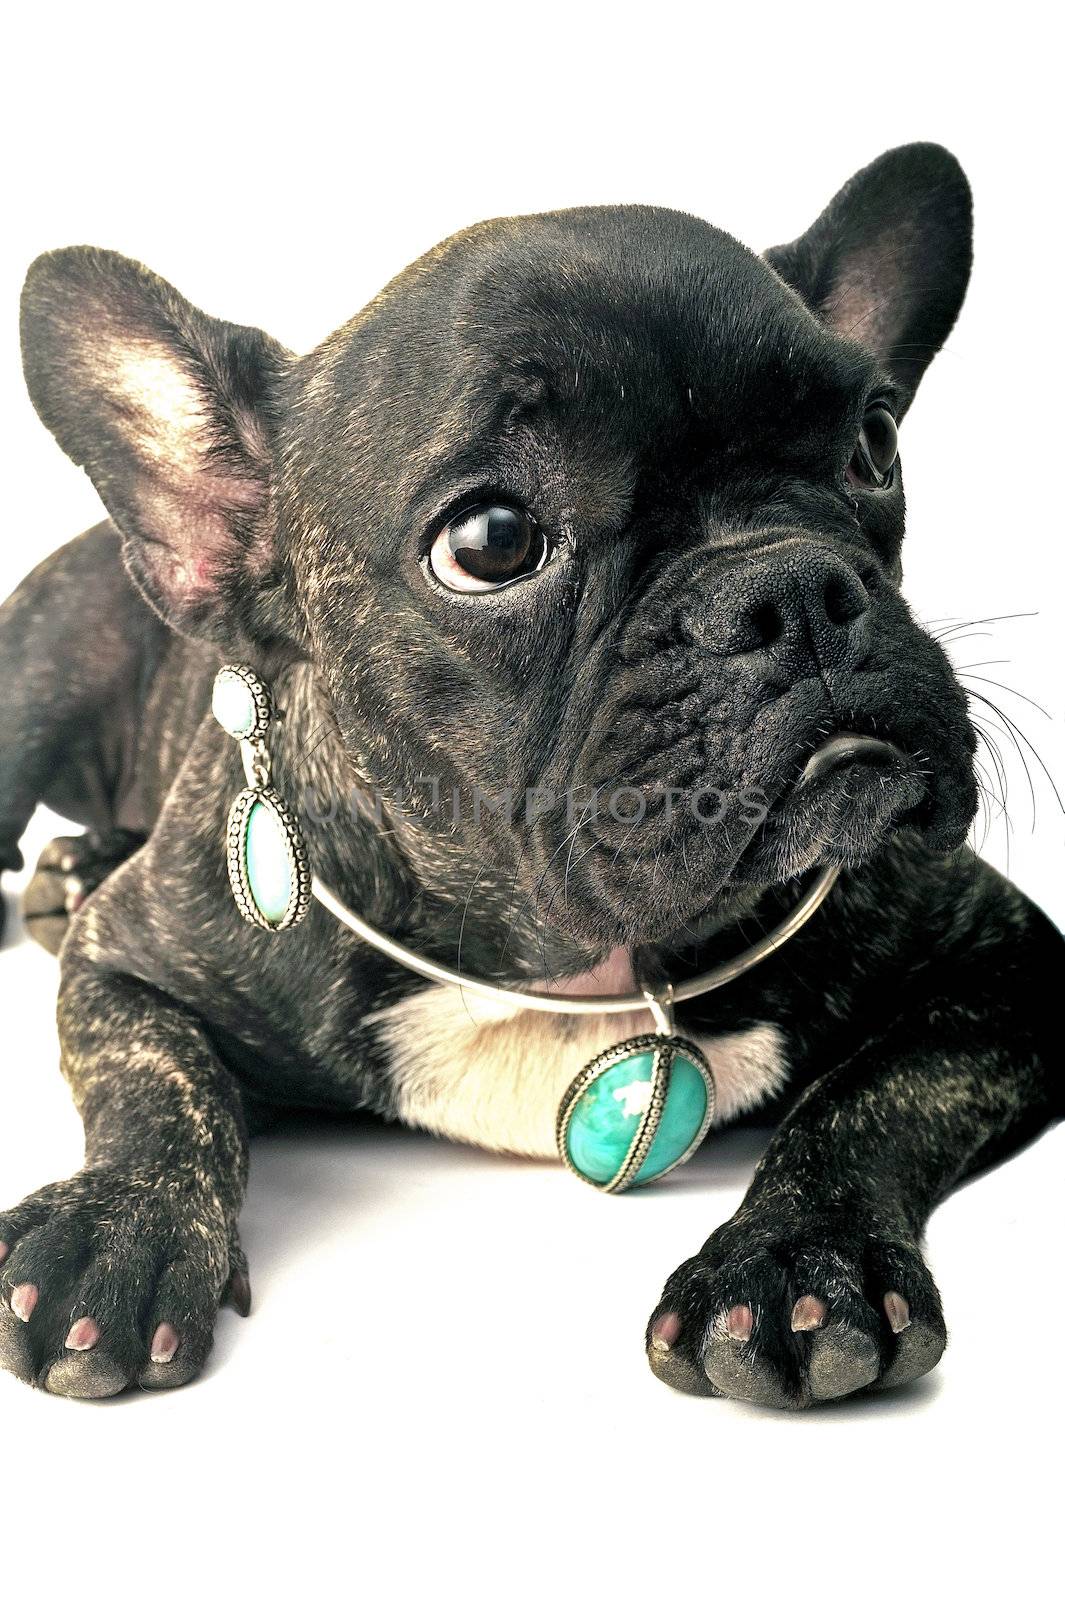 French bulldog by gillespaire